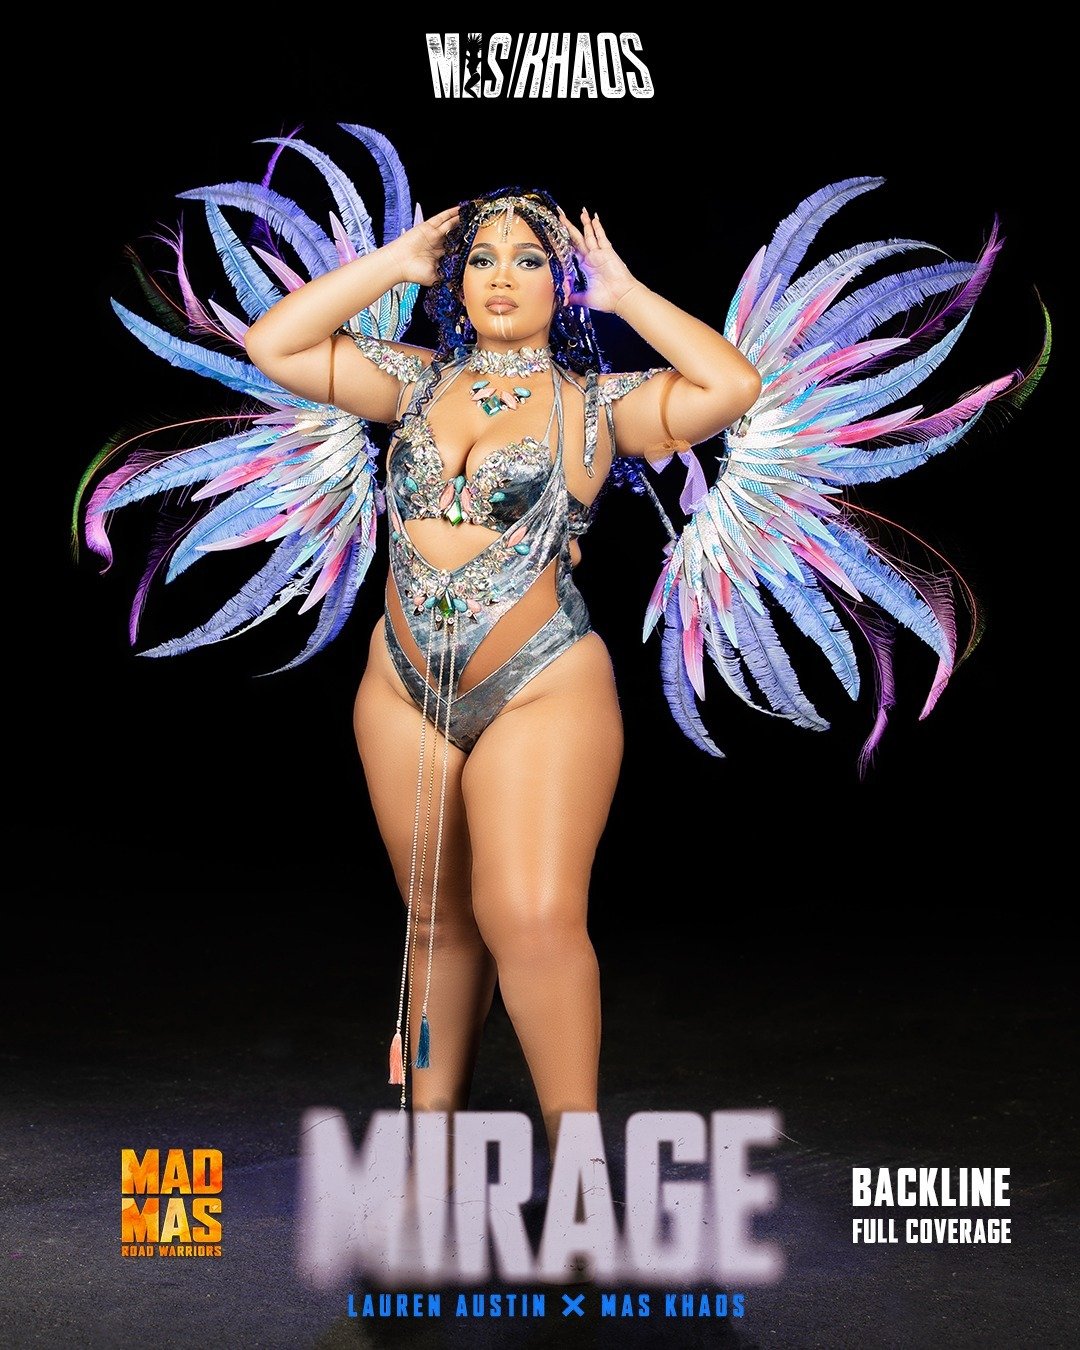 Come through, backline baddies 😍🔥

Get lost in MIRAGE by @laurenxaustin x Mas Khaos!

Deposit and wing deadline - April 18

📸: @exposurephotography242
💄: @_cinni
🙎&zwj;♀️: @rone_victoria, @cie_xo
🦚: Medium and Small Mayhem wings

Costume packag